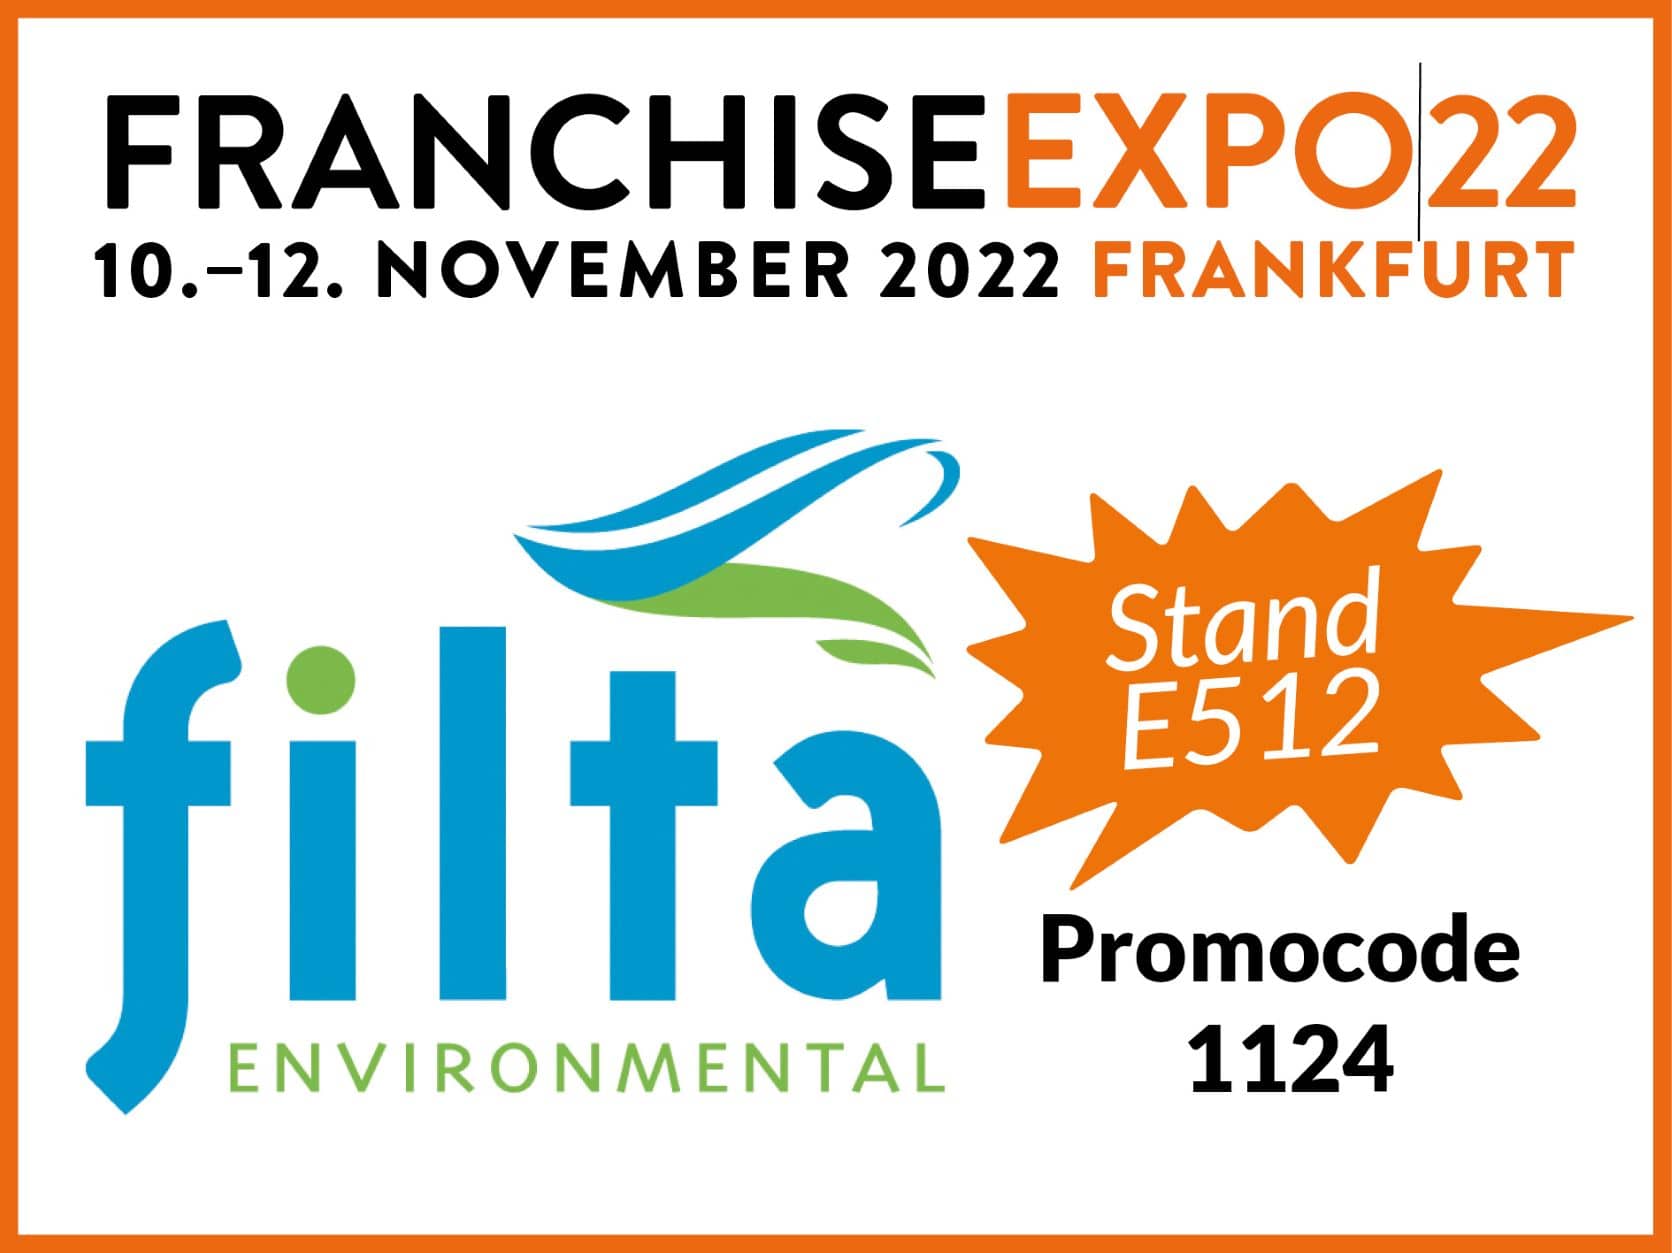 Filta: „Greenest“ Franchise Company 2022 relies on Franchise Expo Frankfurt for partner acquisition